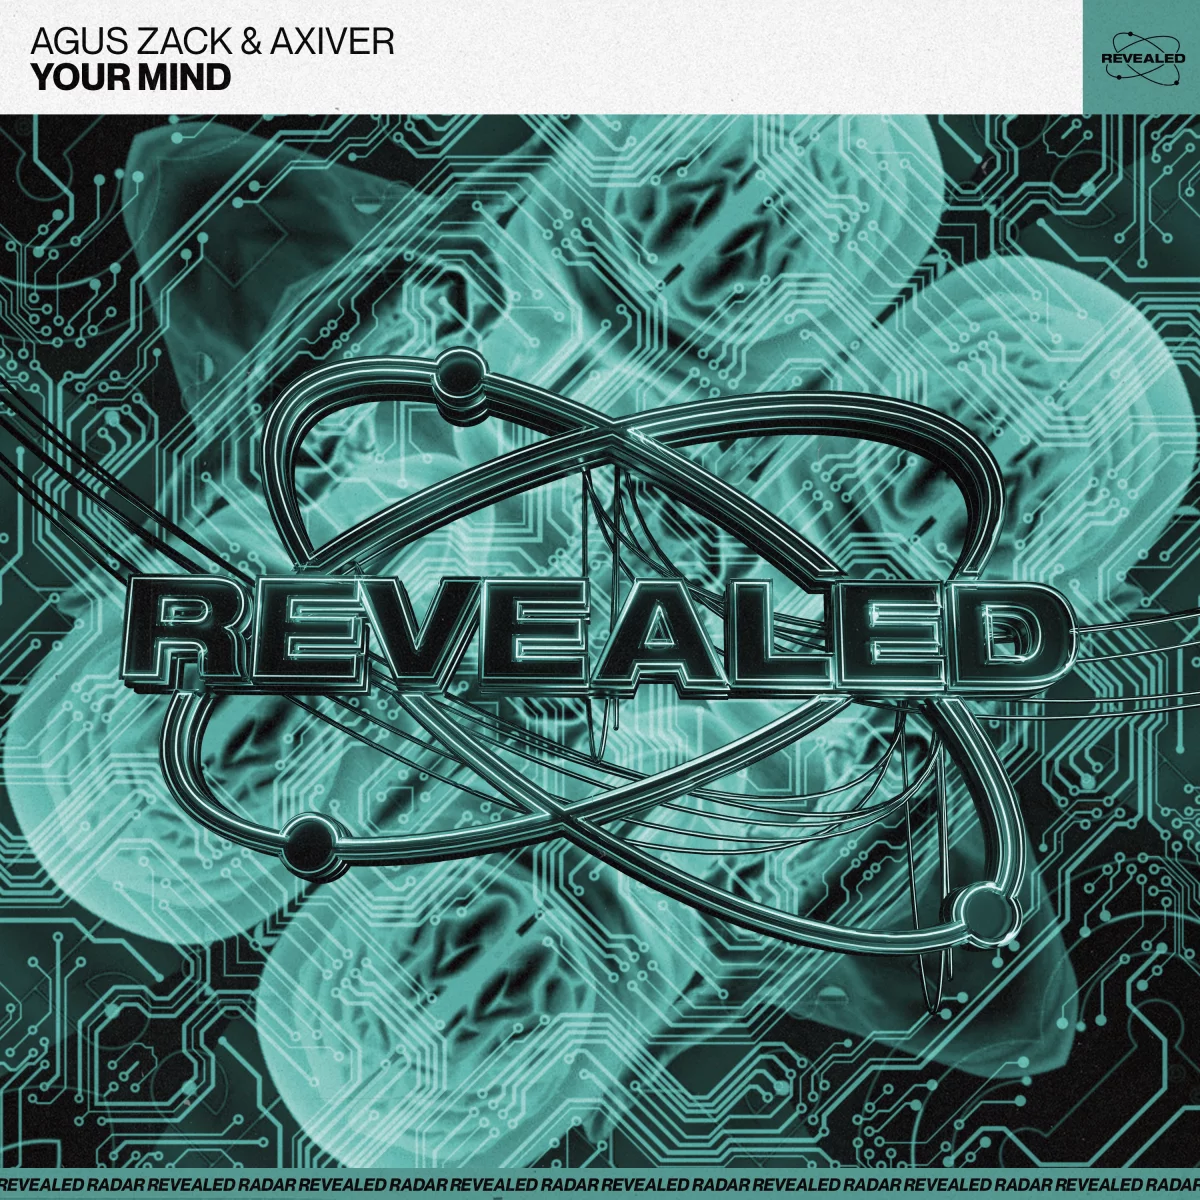 Your Mind - Agus Zack⁠ & Axiver⁠ 